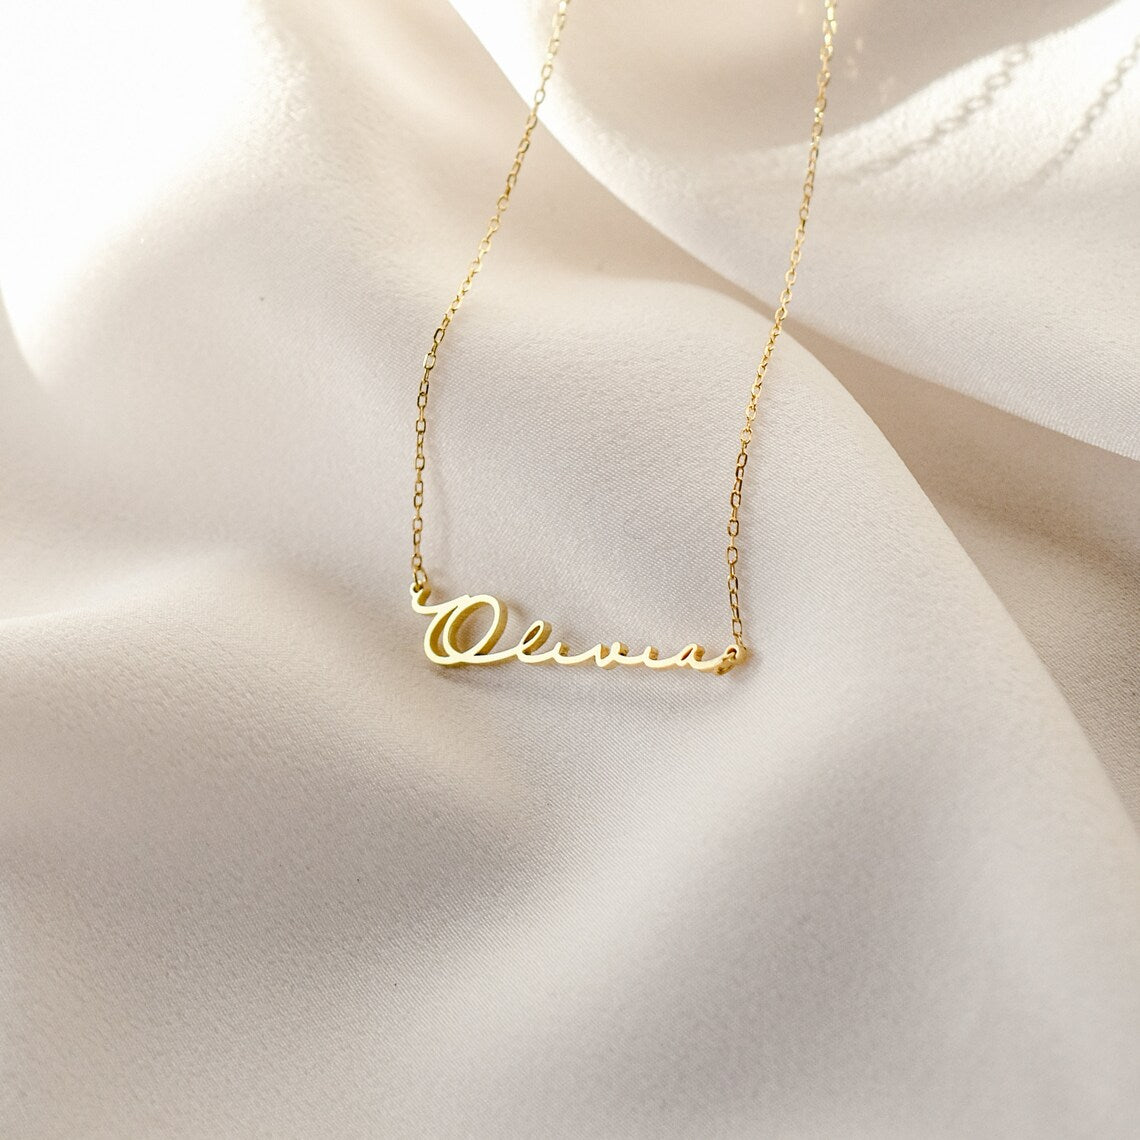 Dainty Name Necklace • Personalized Name Jewelry • Tiny Name Necklace • Baby Girl Name Necklace • Bridesmaids Gift • Baby Shower Gift • Gift for Her